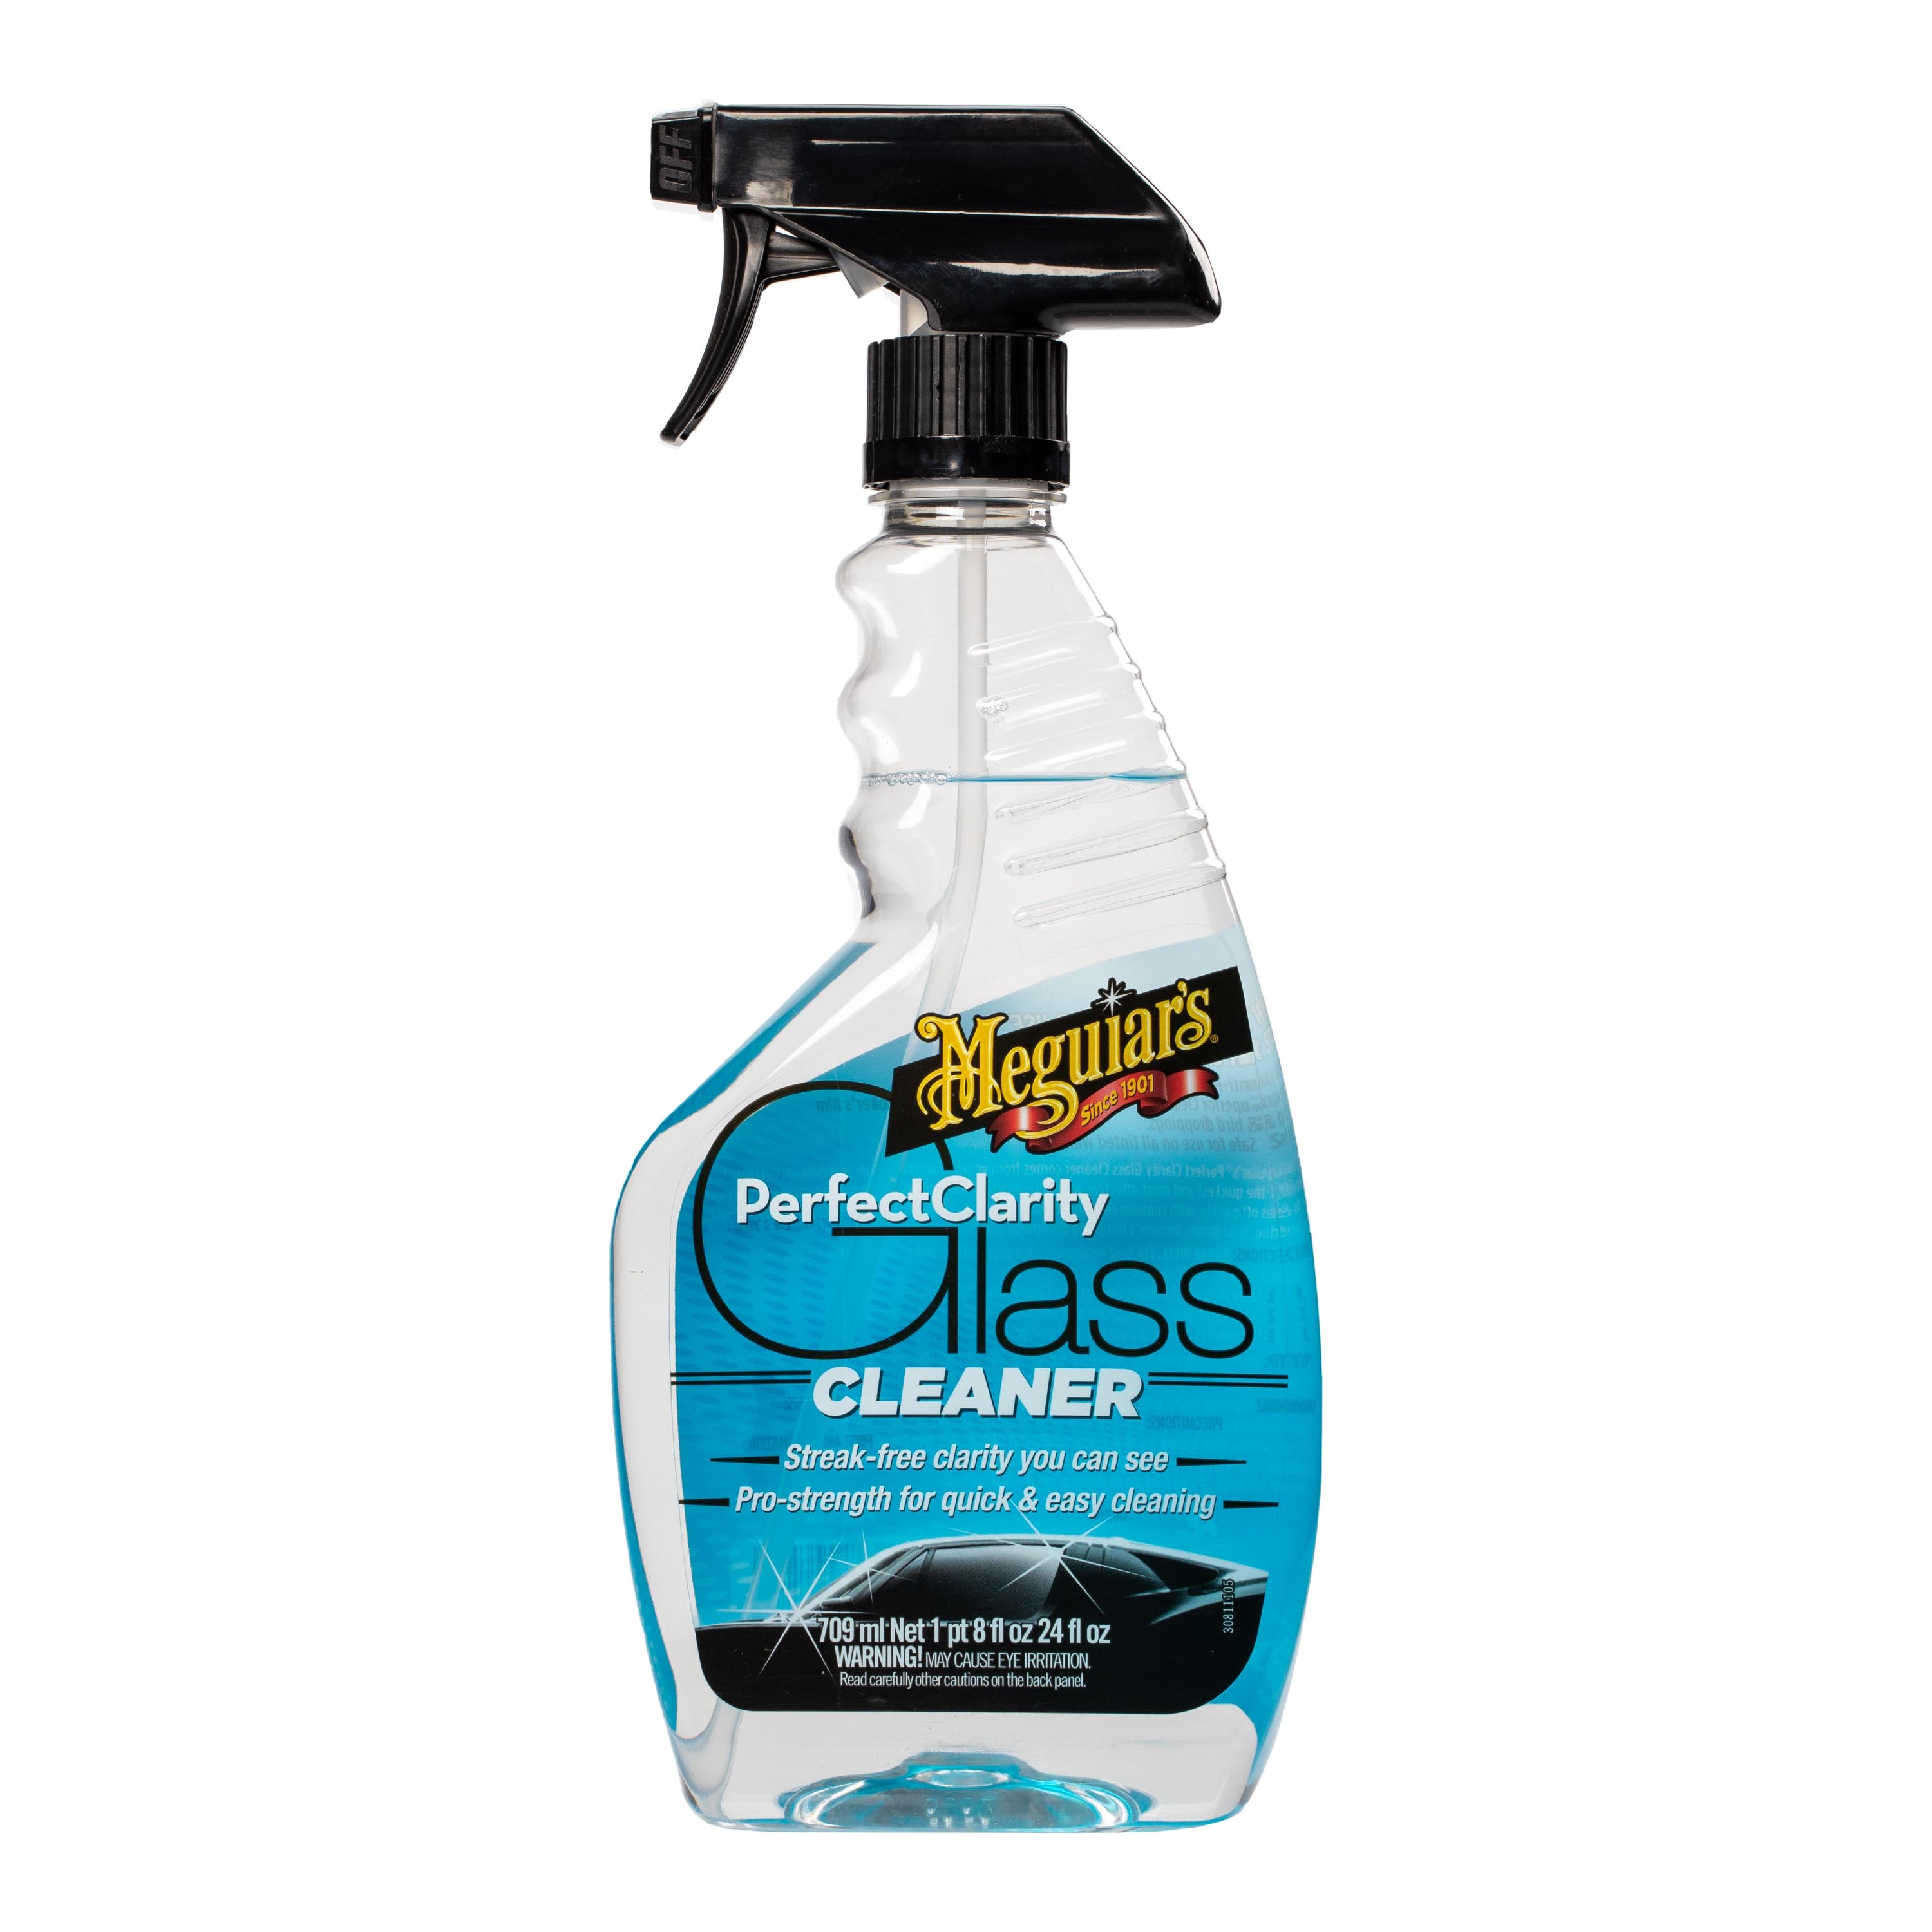 GlassParency Glass Cleaner - 16 oz.